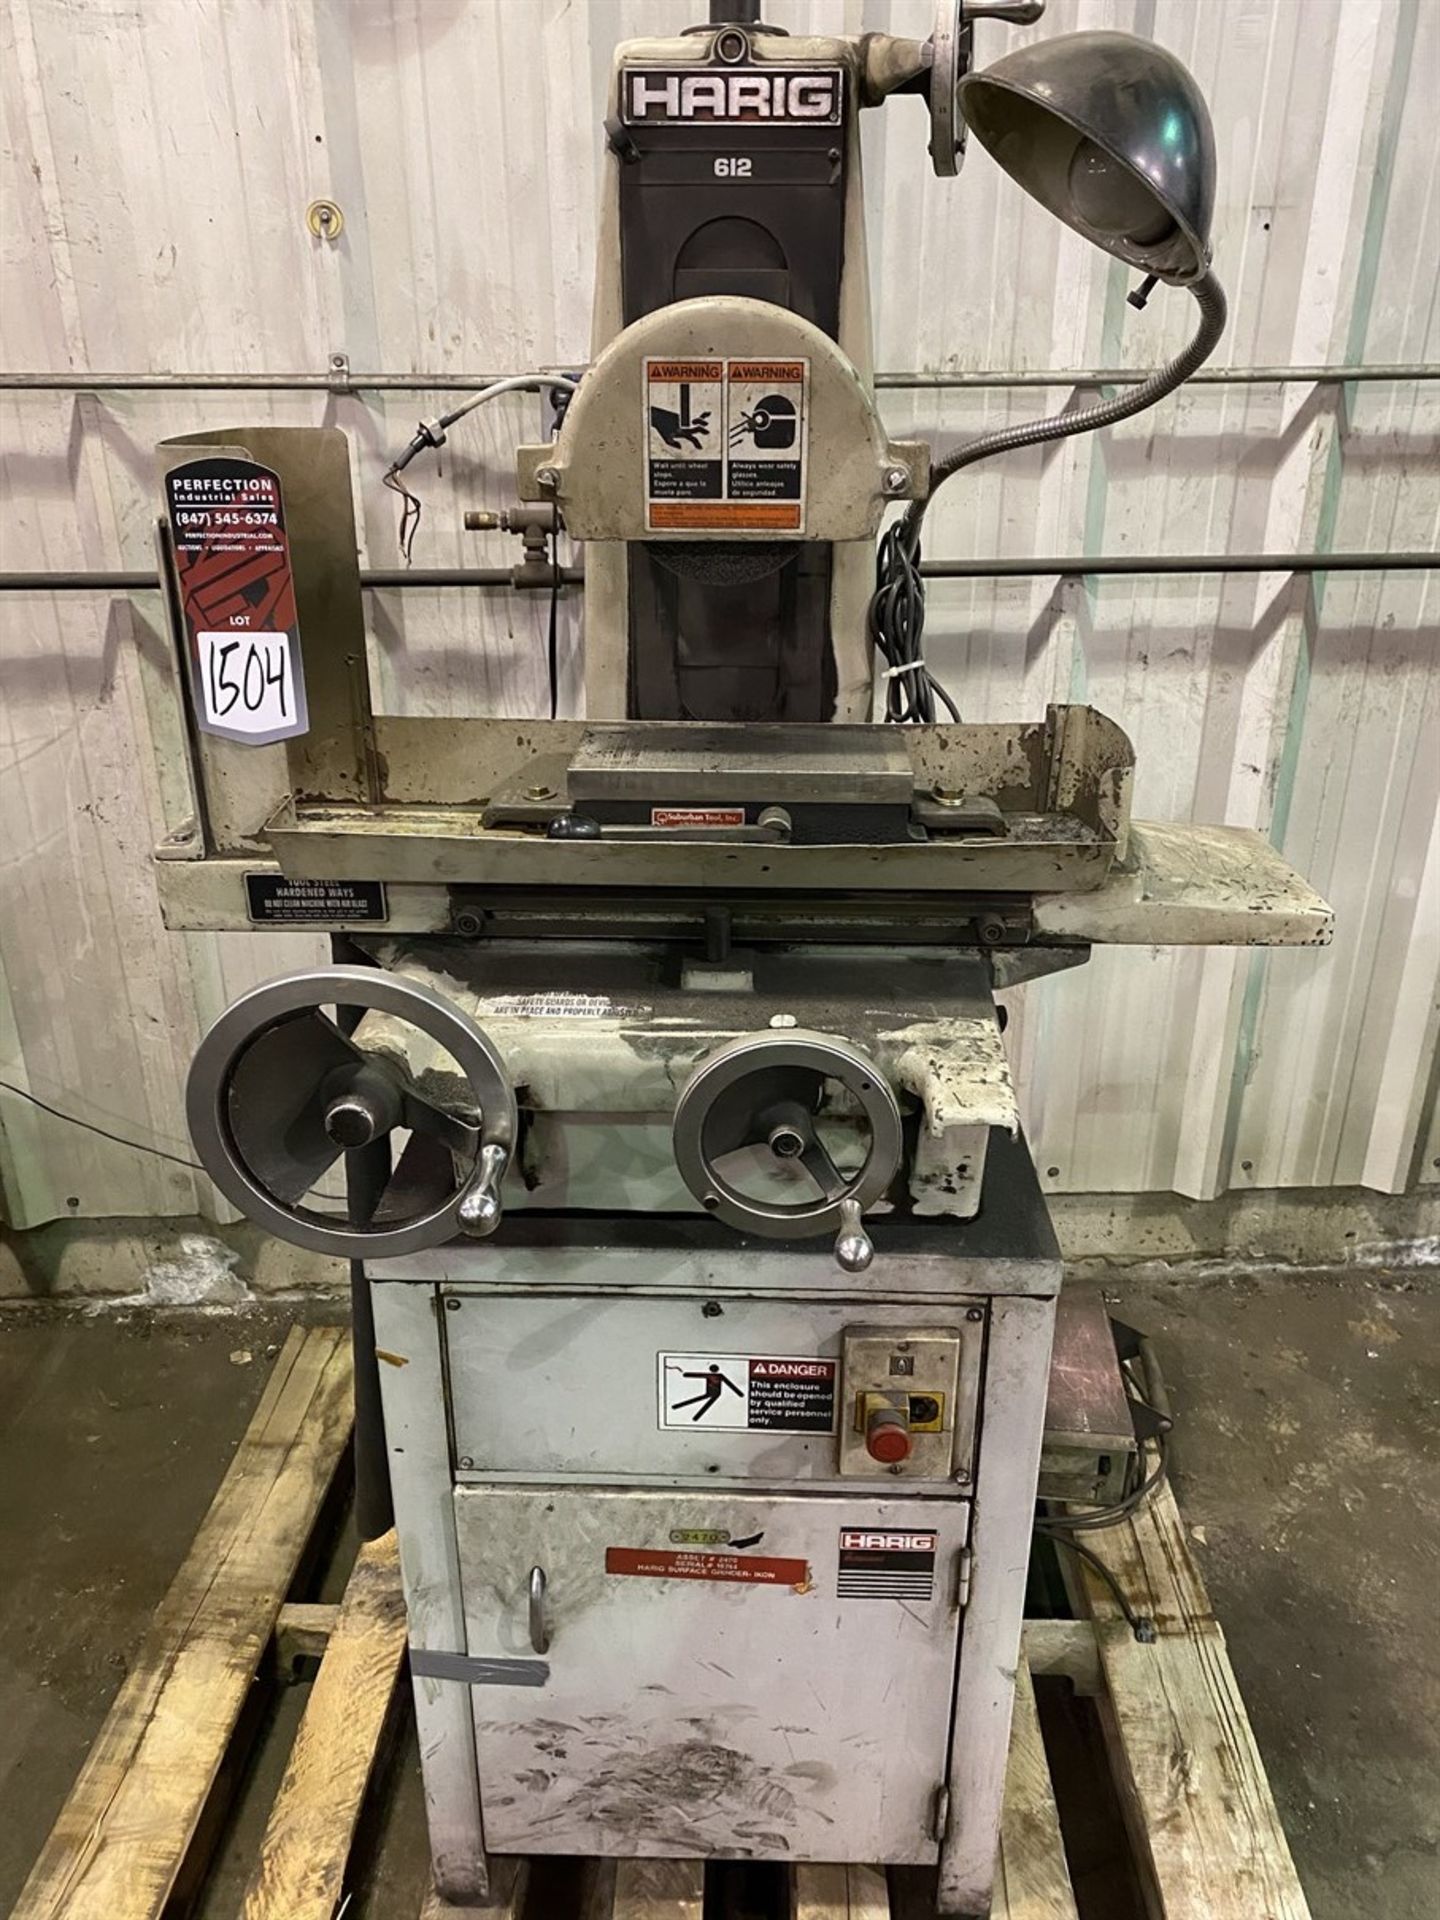 HARIG 612 Surface Grinder, s/n 18744, w/ Suburban 510 Magnetic Chuck - Image 2 of 3